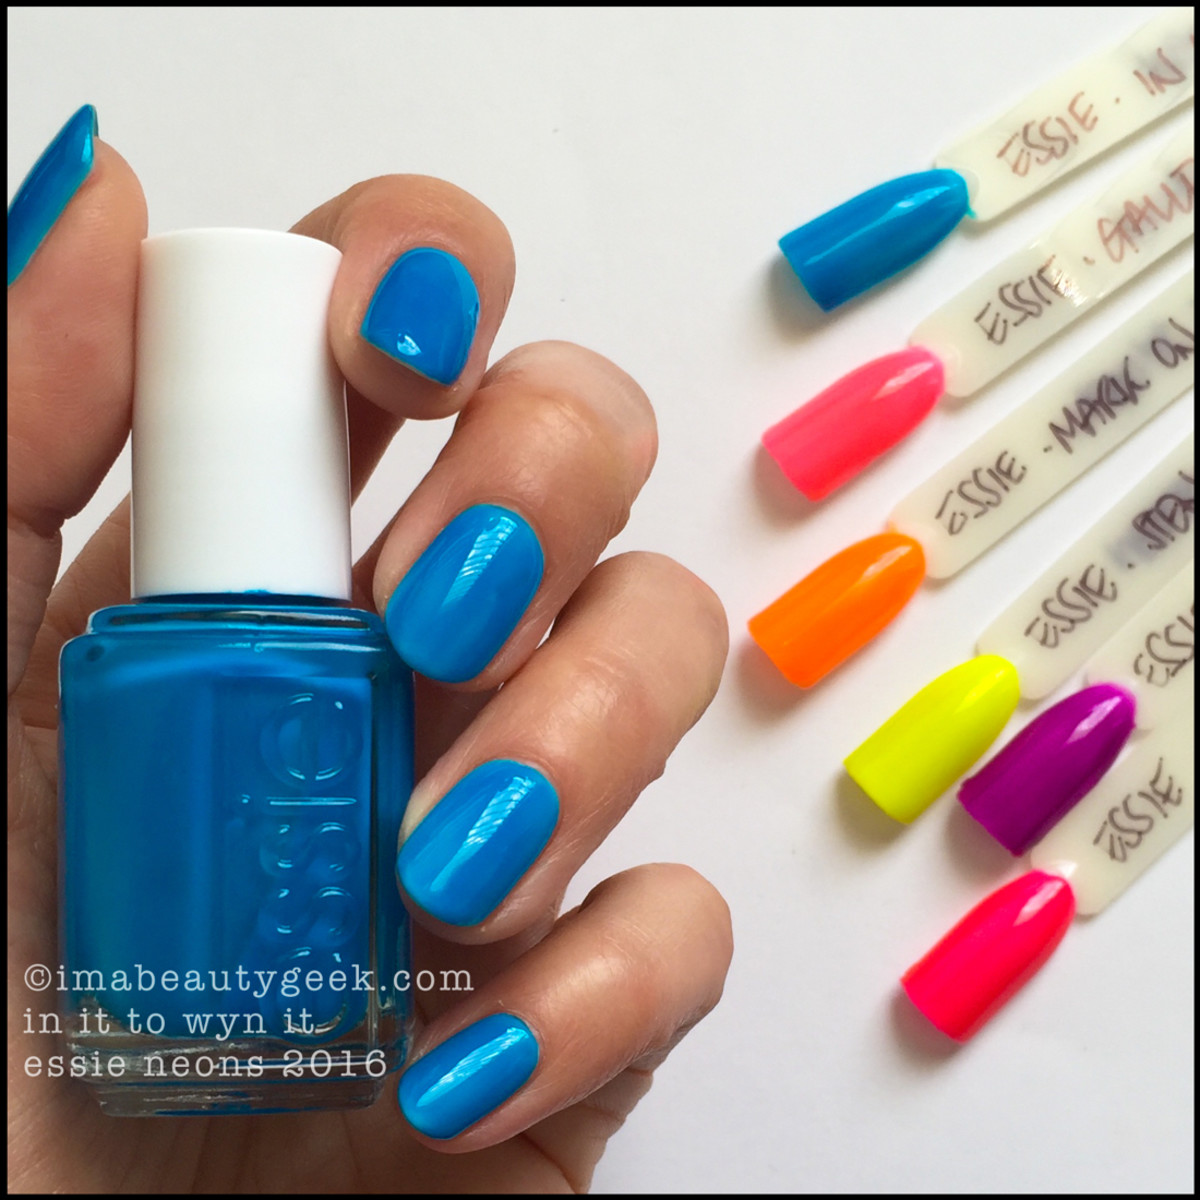 Essie In It To Wyn It_Essie Neons 2016 Collection Swatches Review